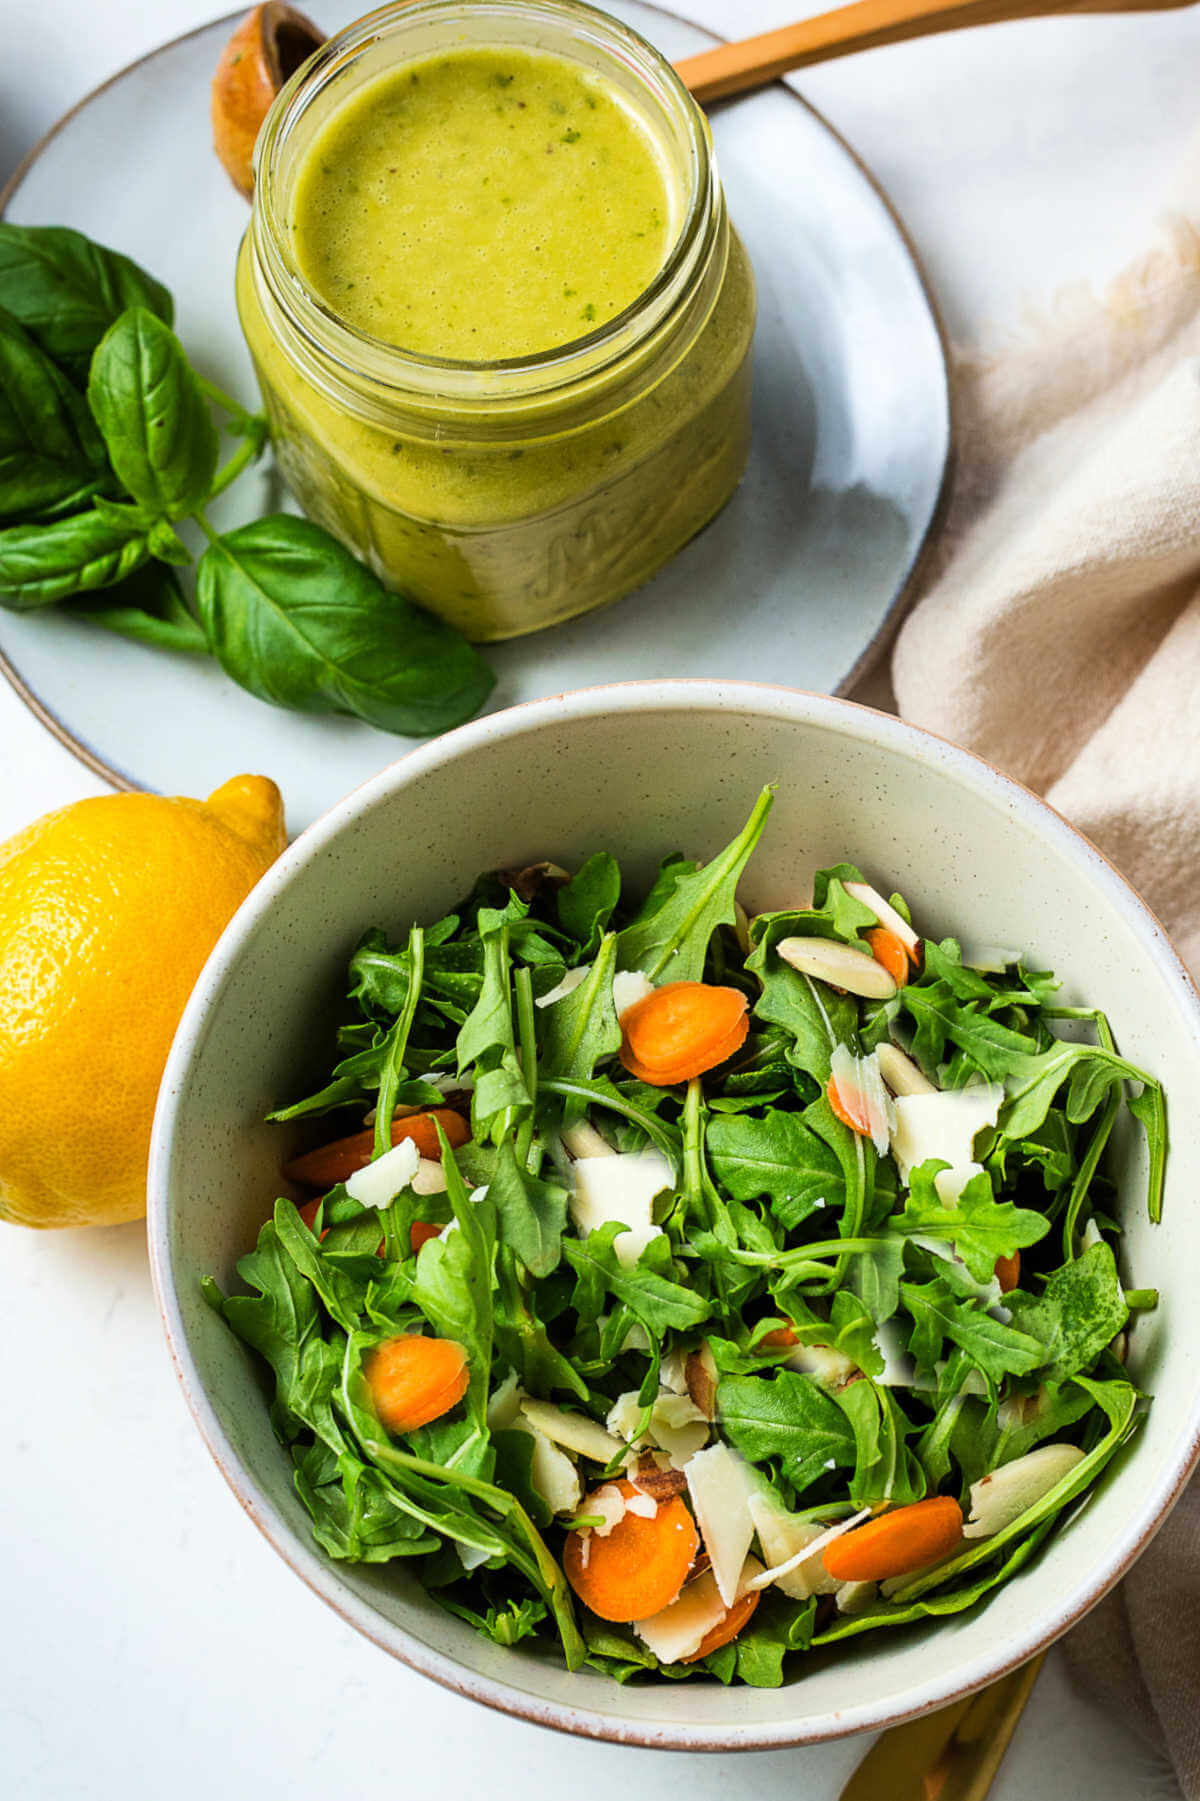 An arugula salad in a bowl and a jar of salad dressing on a table.